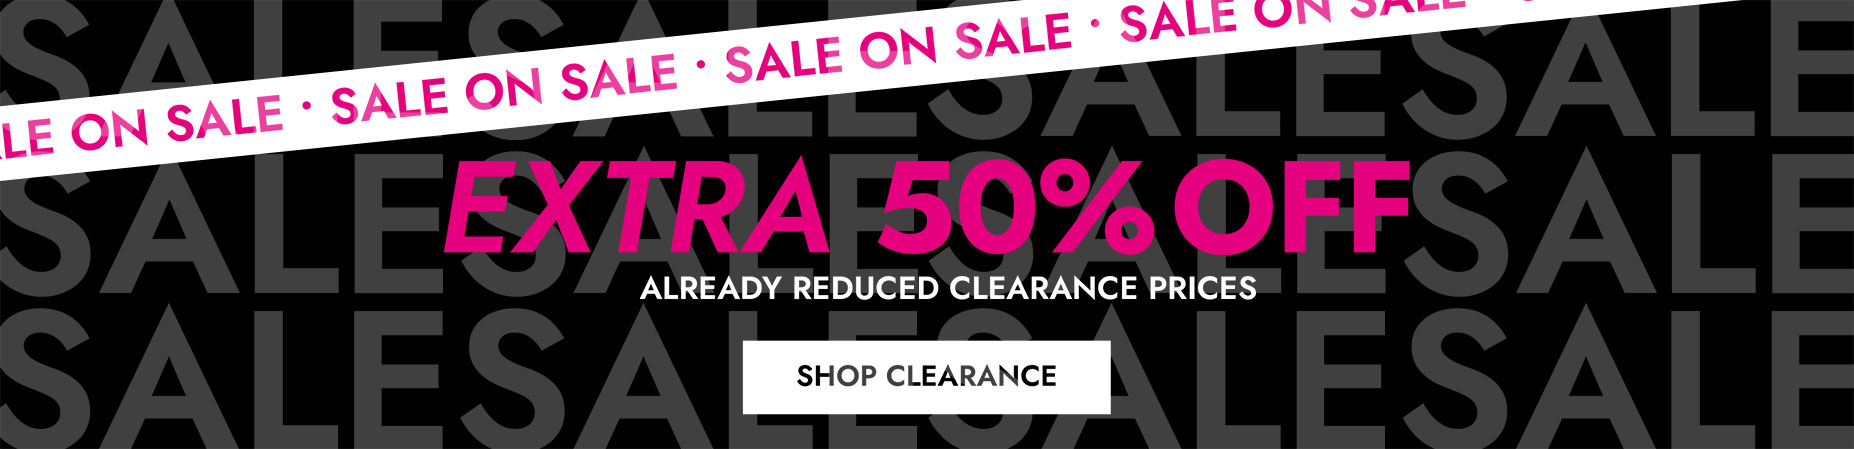 sale on sale extra 50% Off already reduced clearance prices